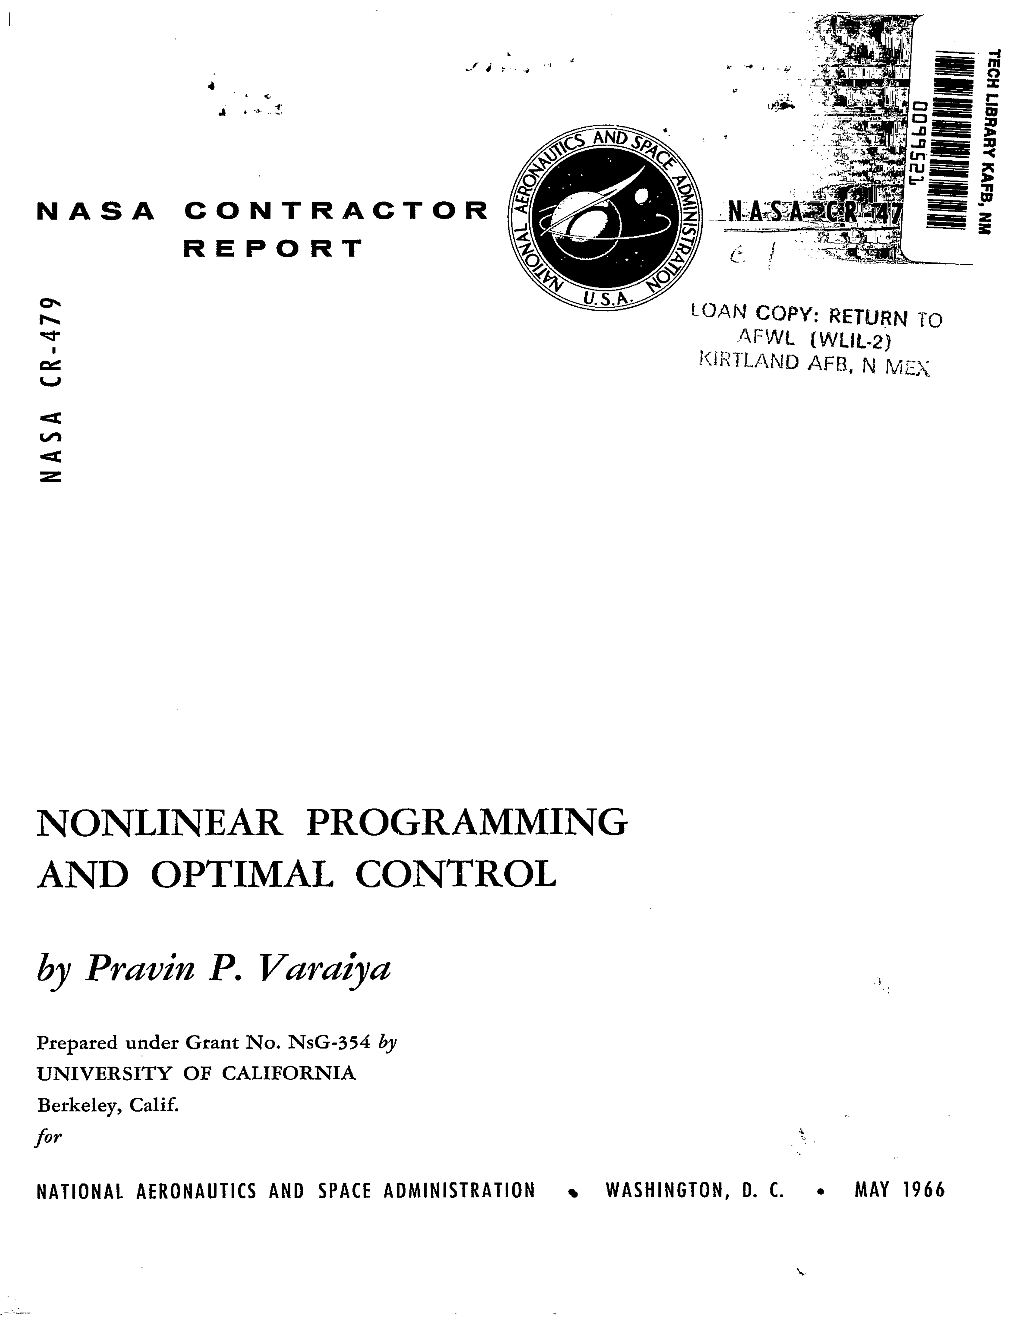 Nonlinear Programming and Optimal Control